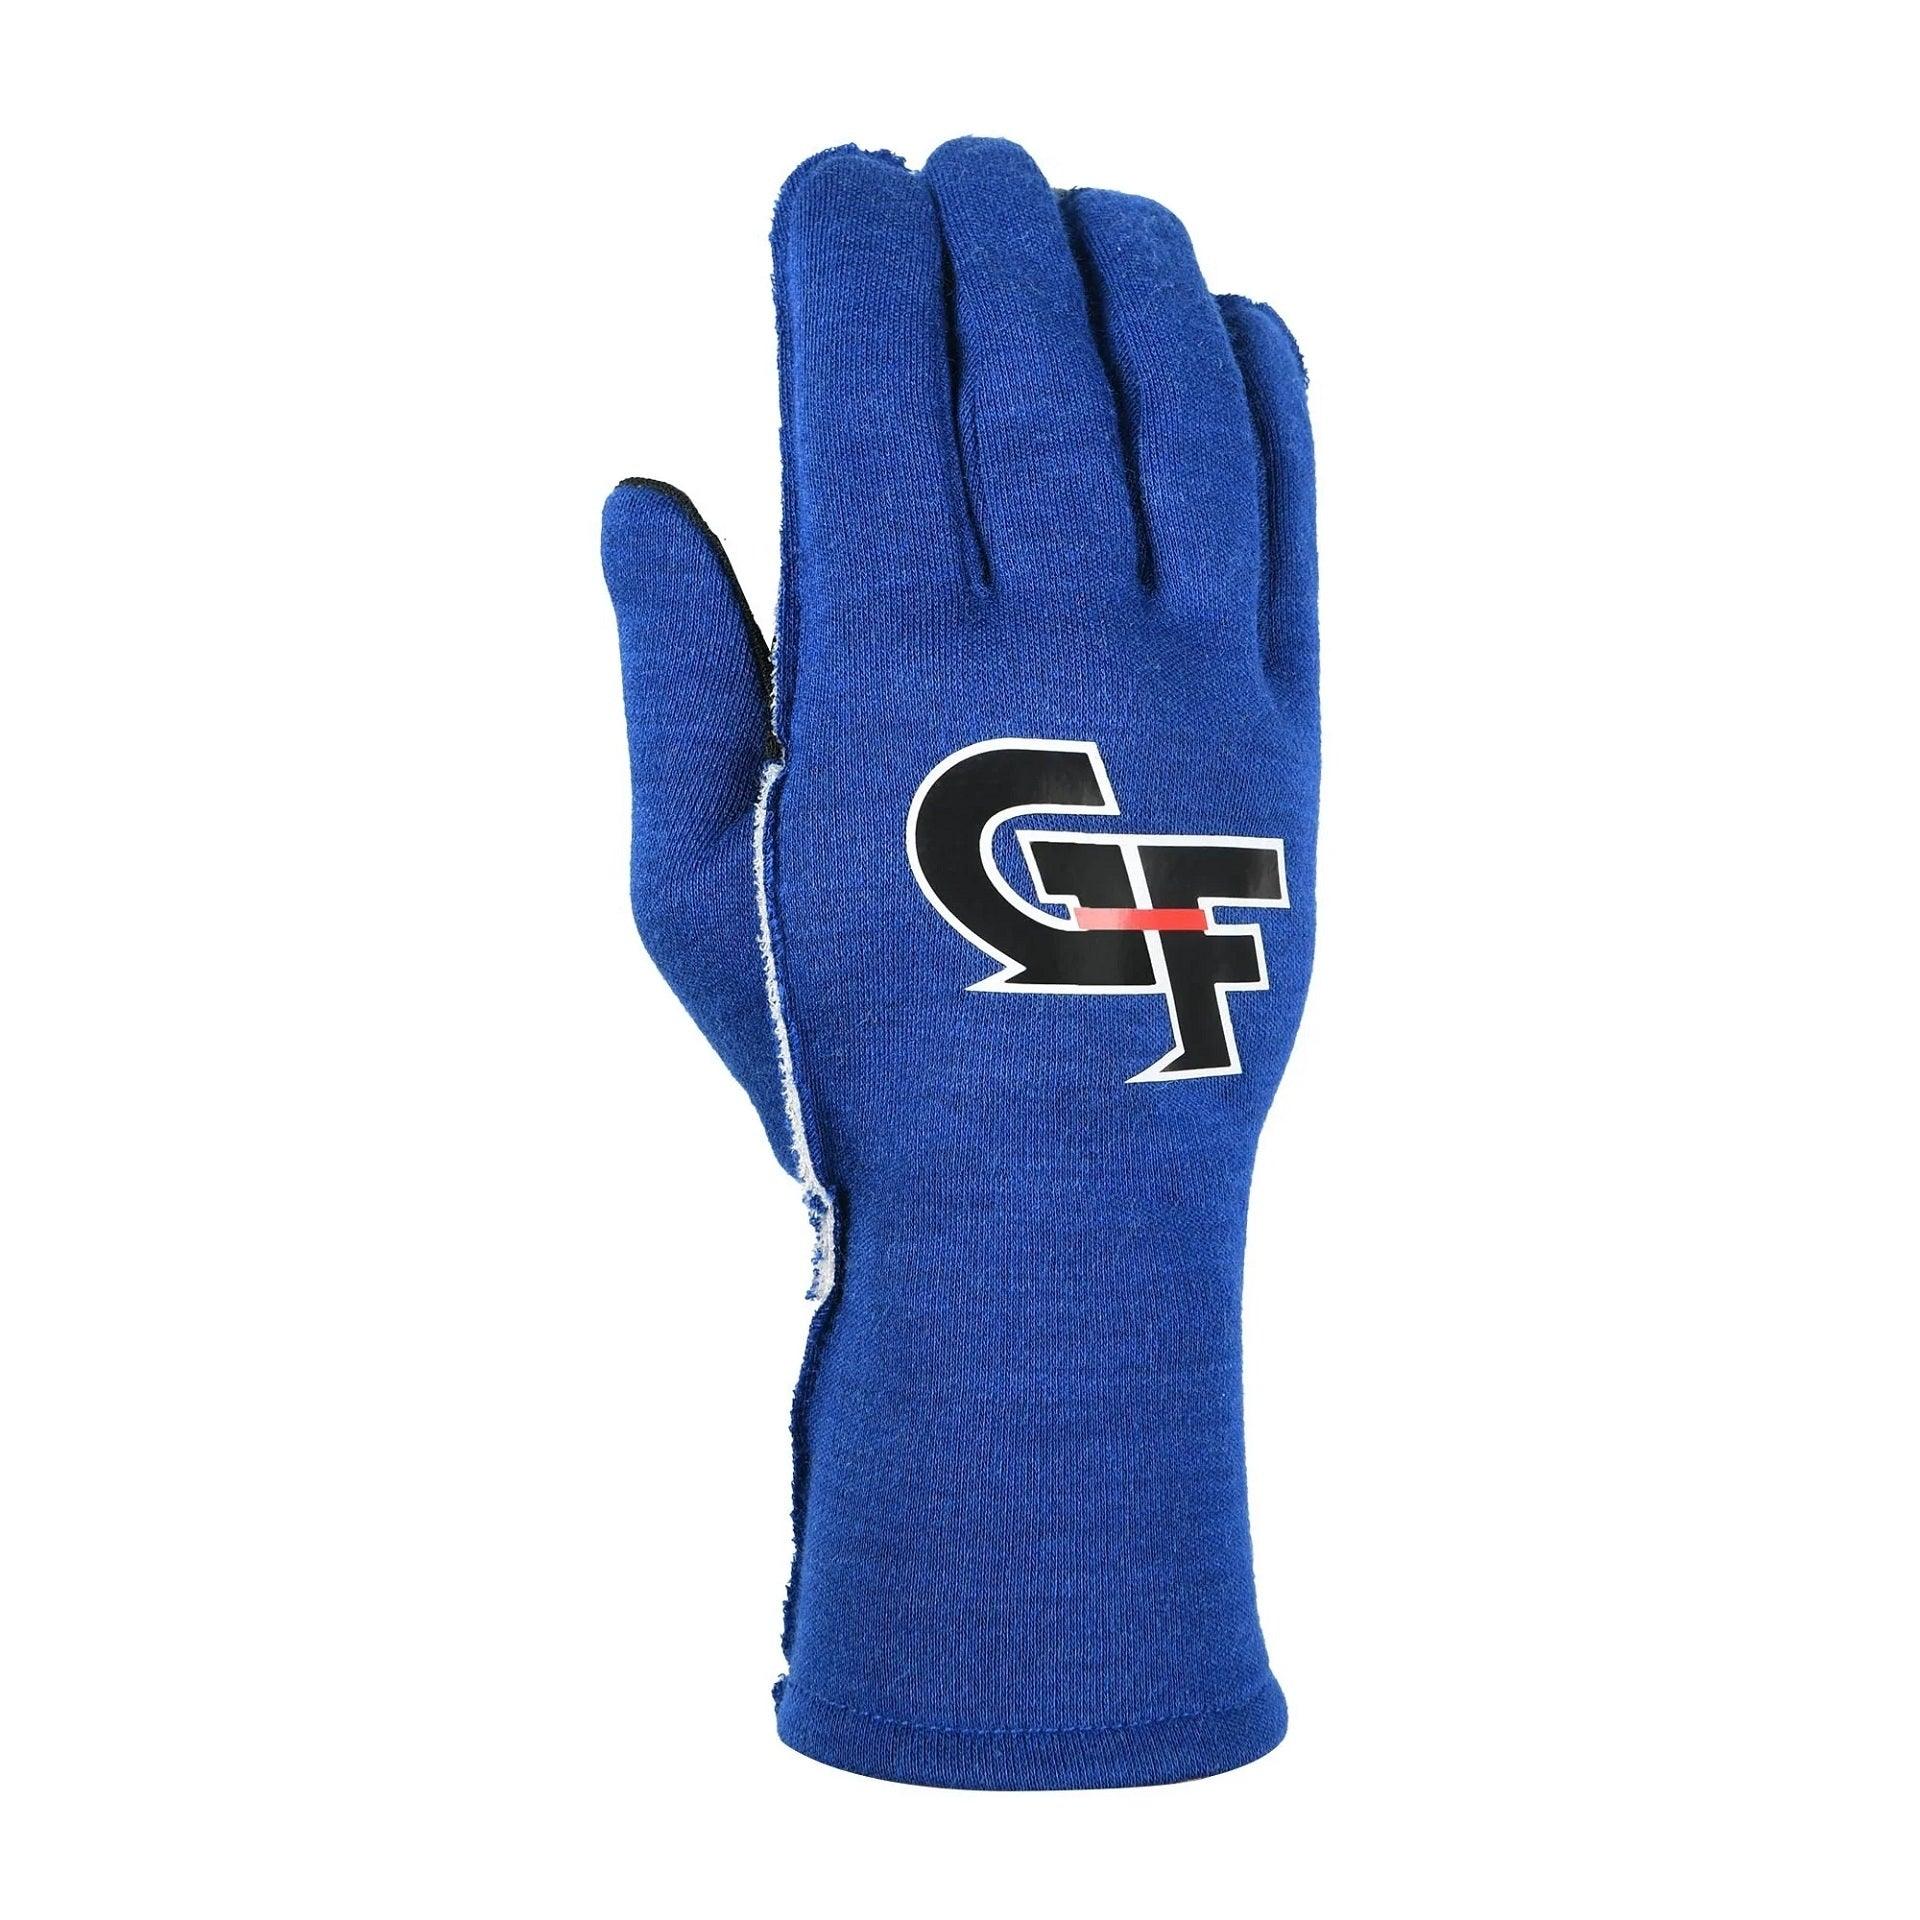 Gloves G-Limit Small Blue - Burlile Performance Products